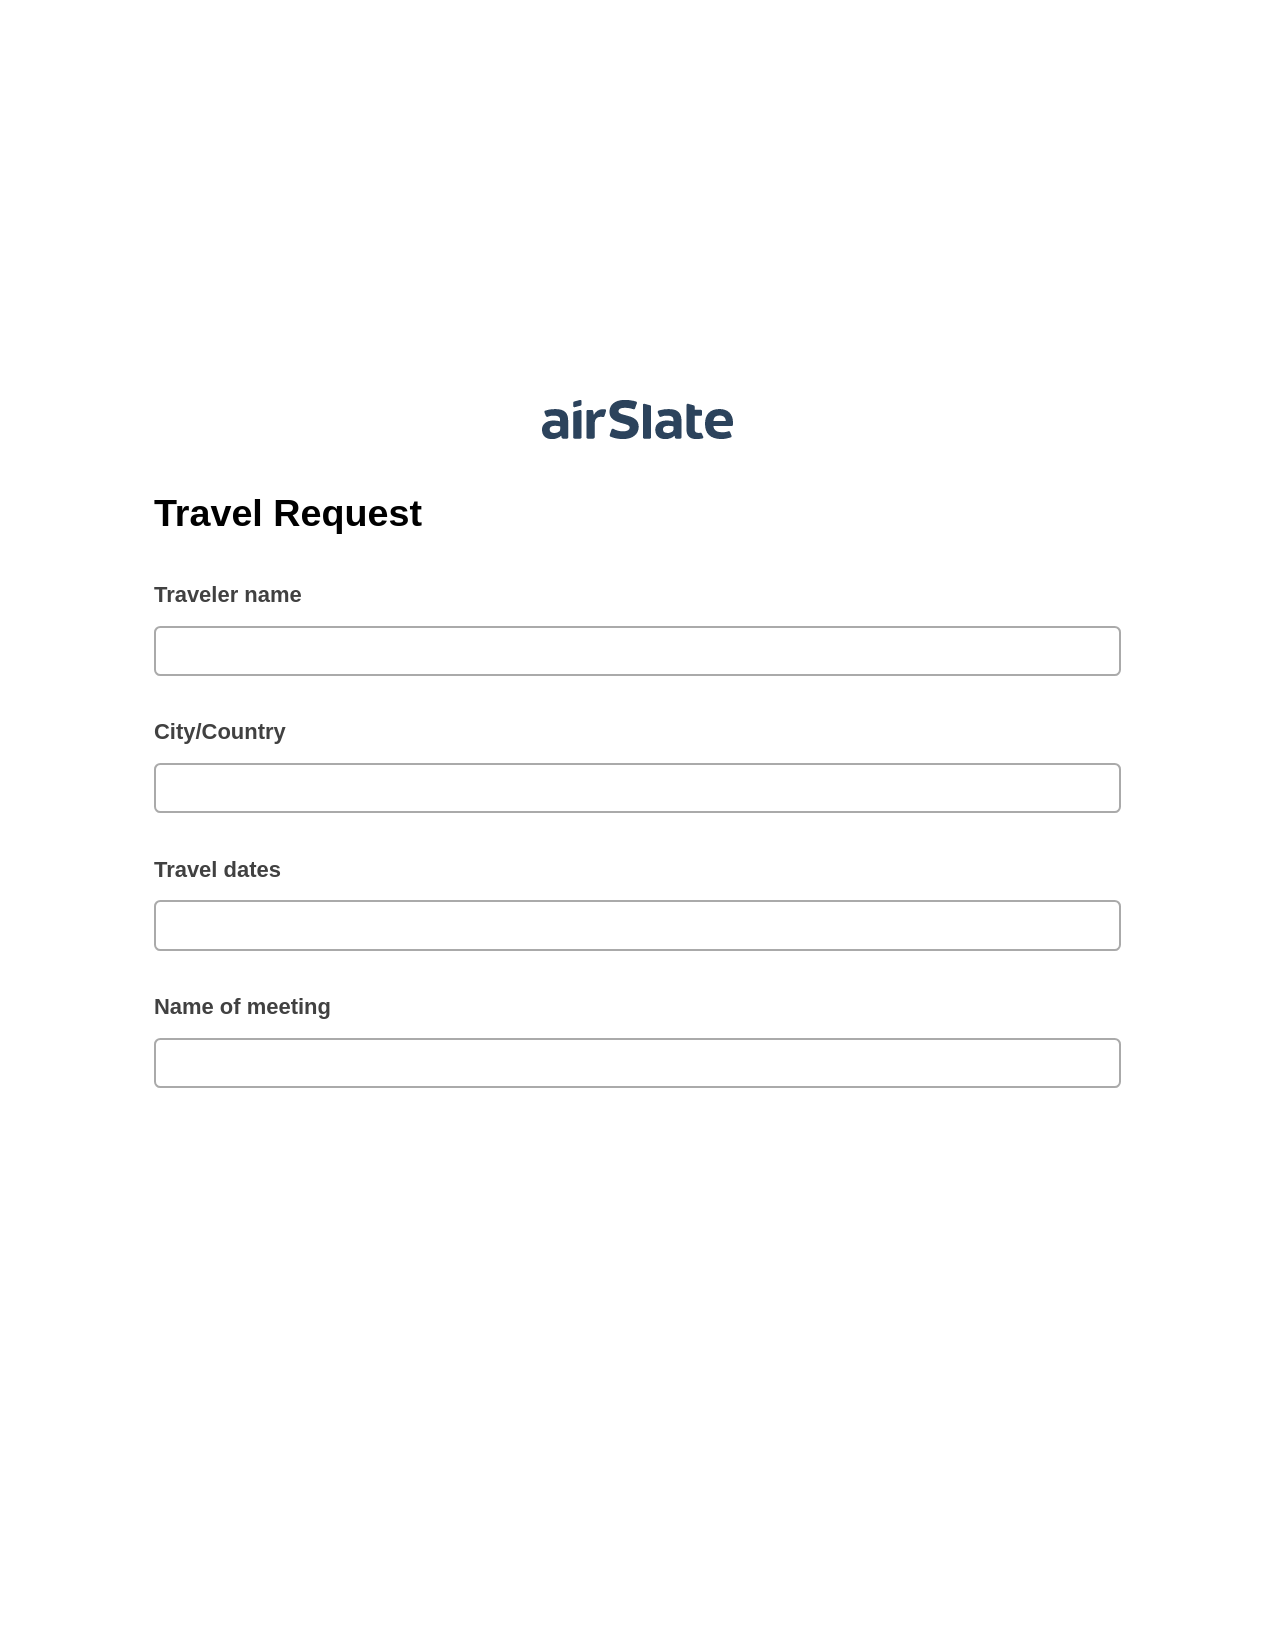 Travel Request Pre-fill Dropdowns from CSV File Bot, Create slate addon, Export to Excel 365 Bot